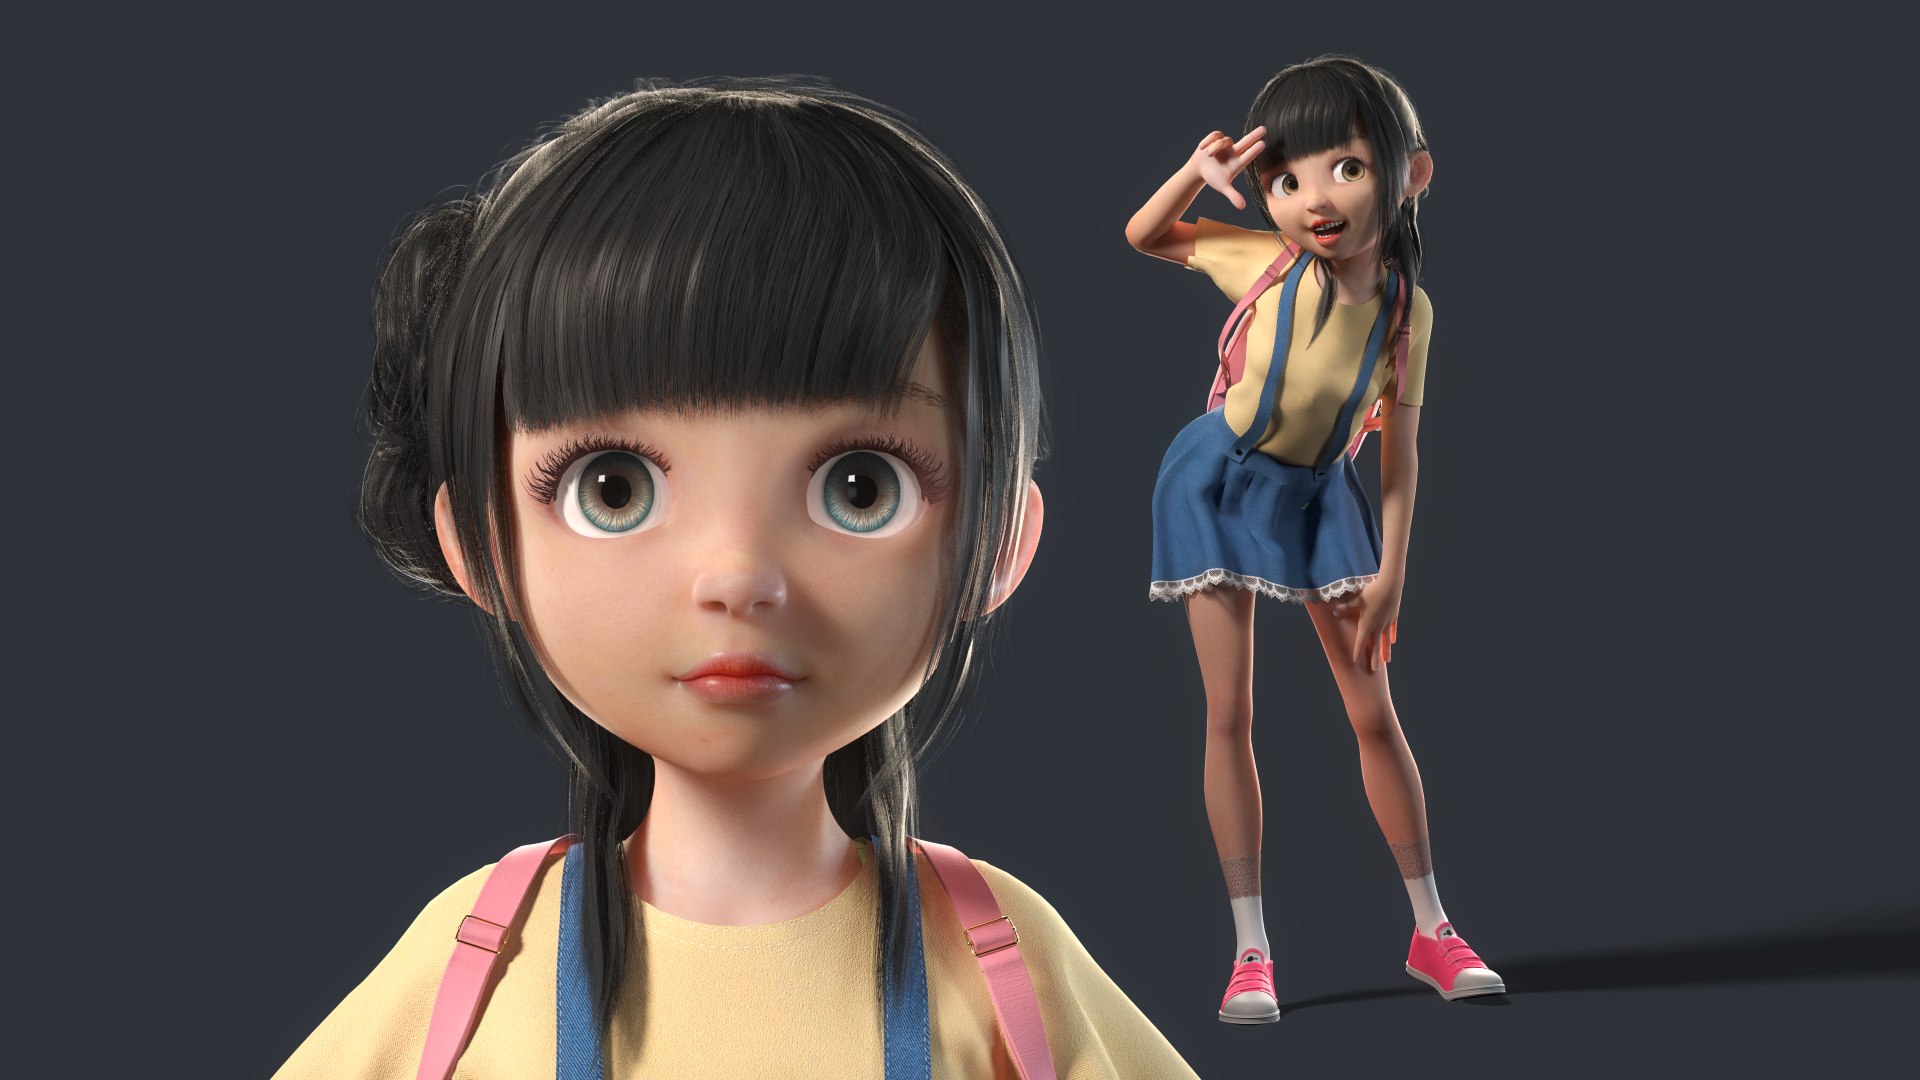 Rigged Animated Cartoon Girl Character 2 3D Model $129 - .ma - Free3D